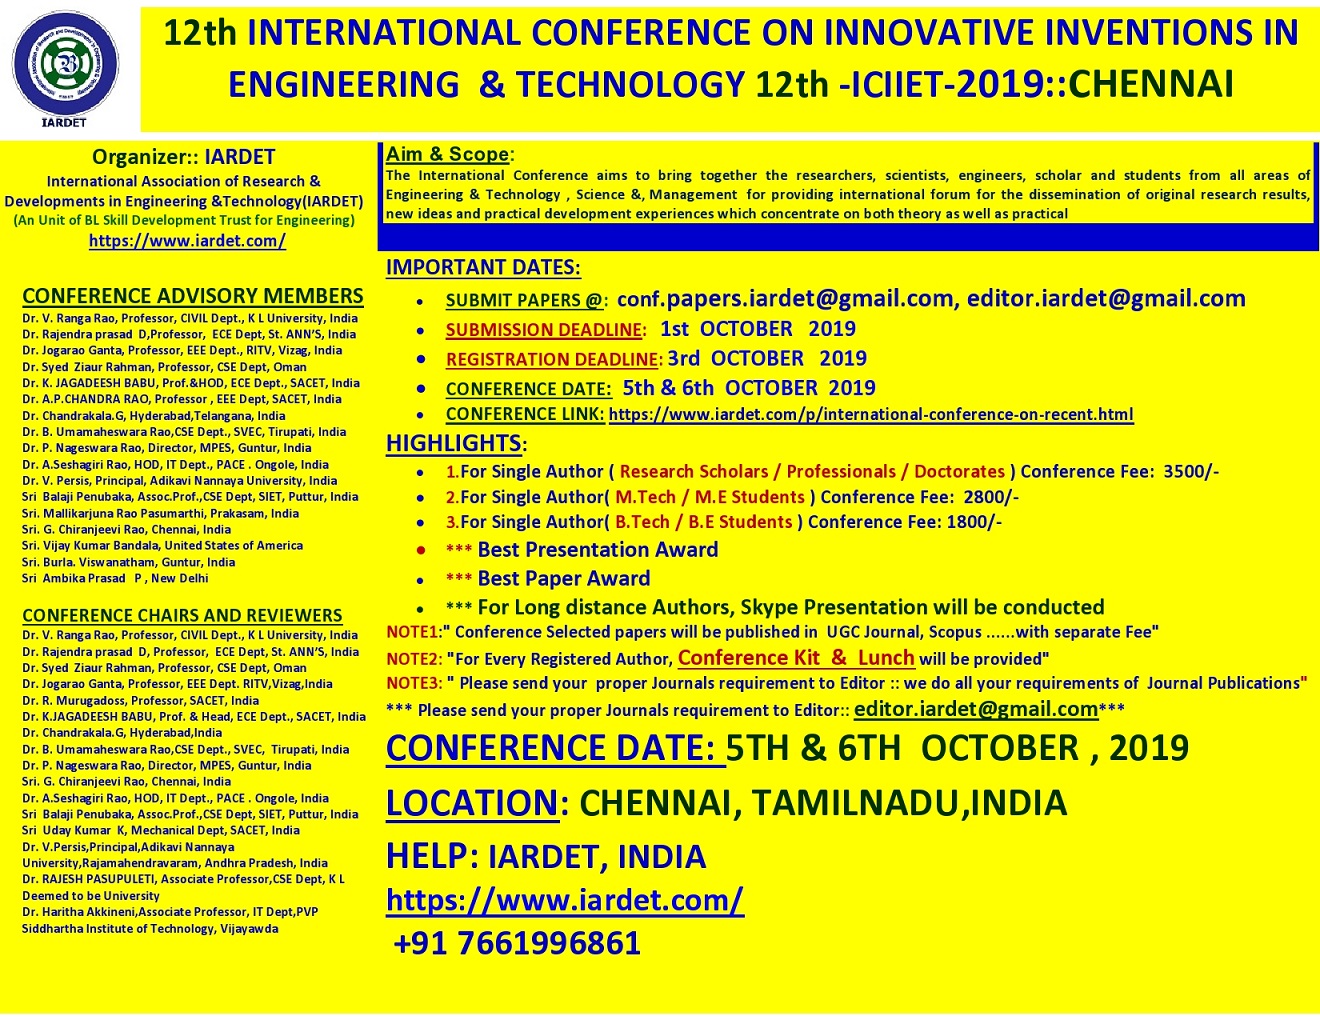 12th International Conference on Innovative Inventions in Engineering and Technology ICIIET 2019